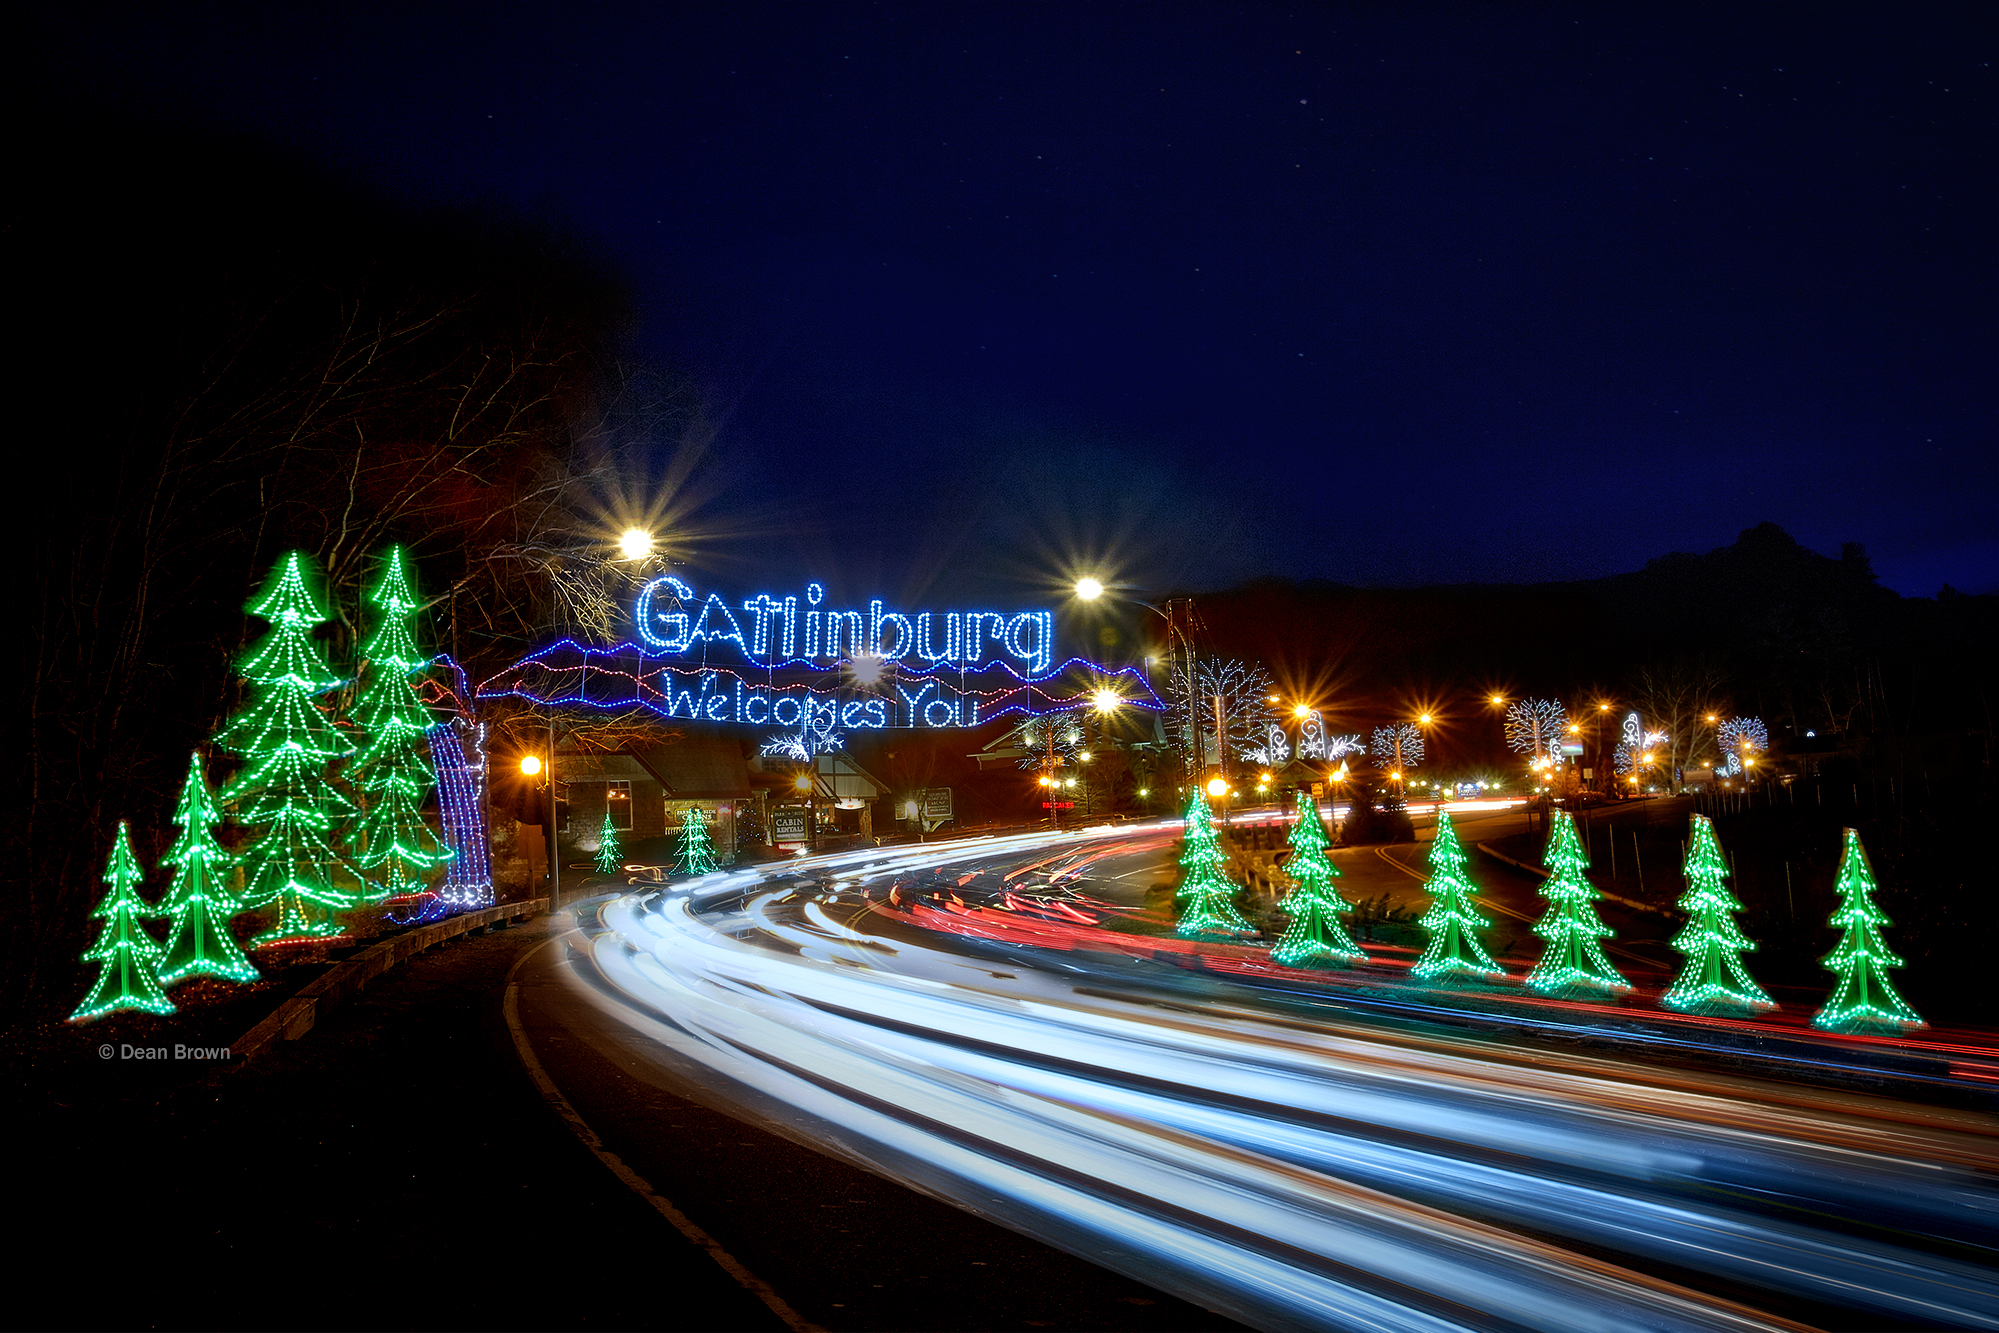 A Gatlinburg Holiday Season – For One and For All